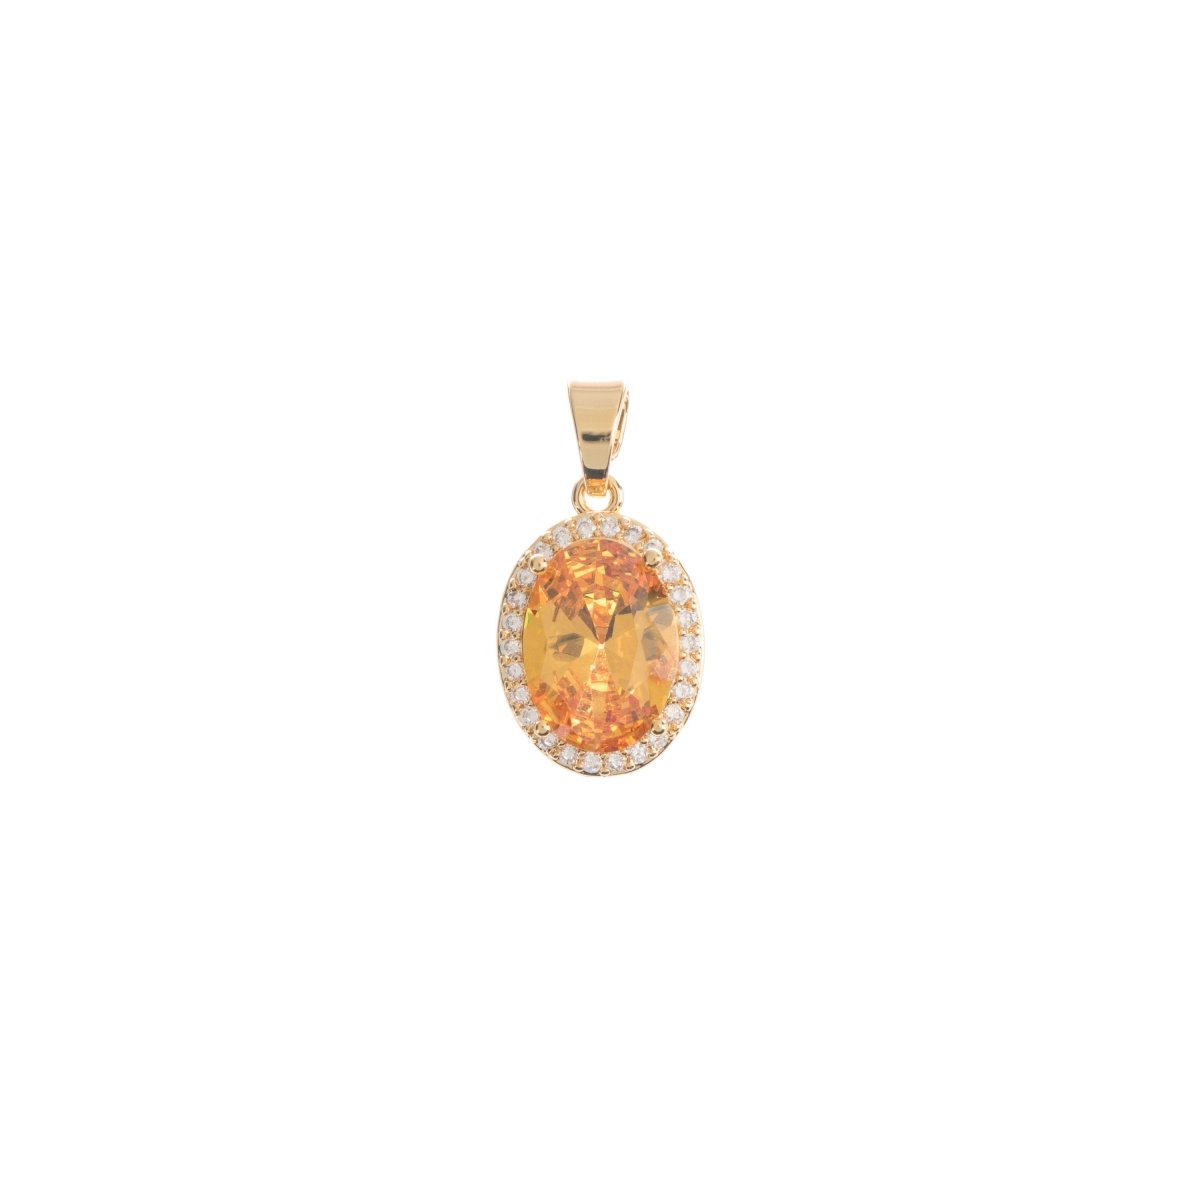 24K Gold Filled Fiery Orange, Sunburst, Pink Red Green Oval Charm Cubic Zirconia Bails for Earring Necklace Pendant Jewelry Making Supplies H-764 - H-770 - DLUXCA